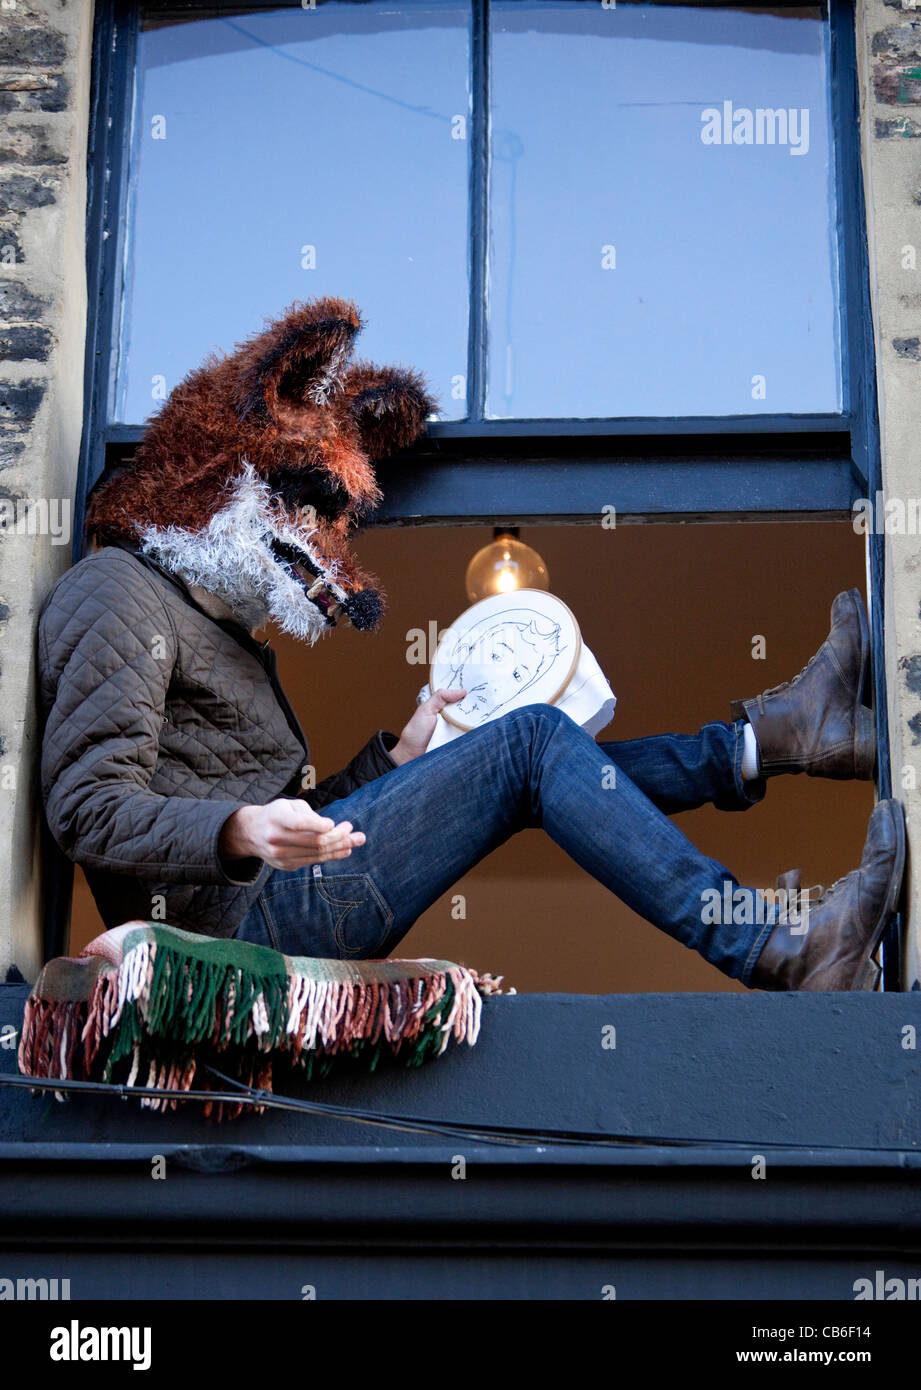 Man sitting on a window sill wearing a fox head mask and hand sewing using an embroidery hoop, London, England, UK, GB Stock Photo